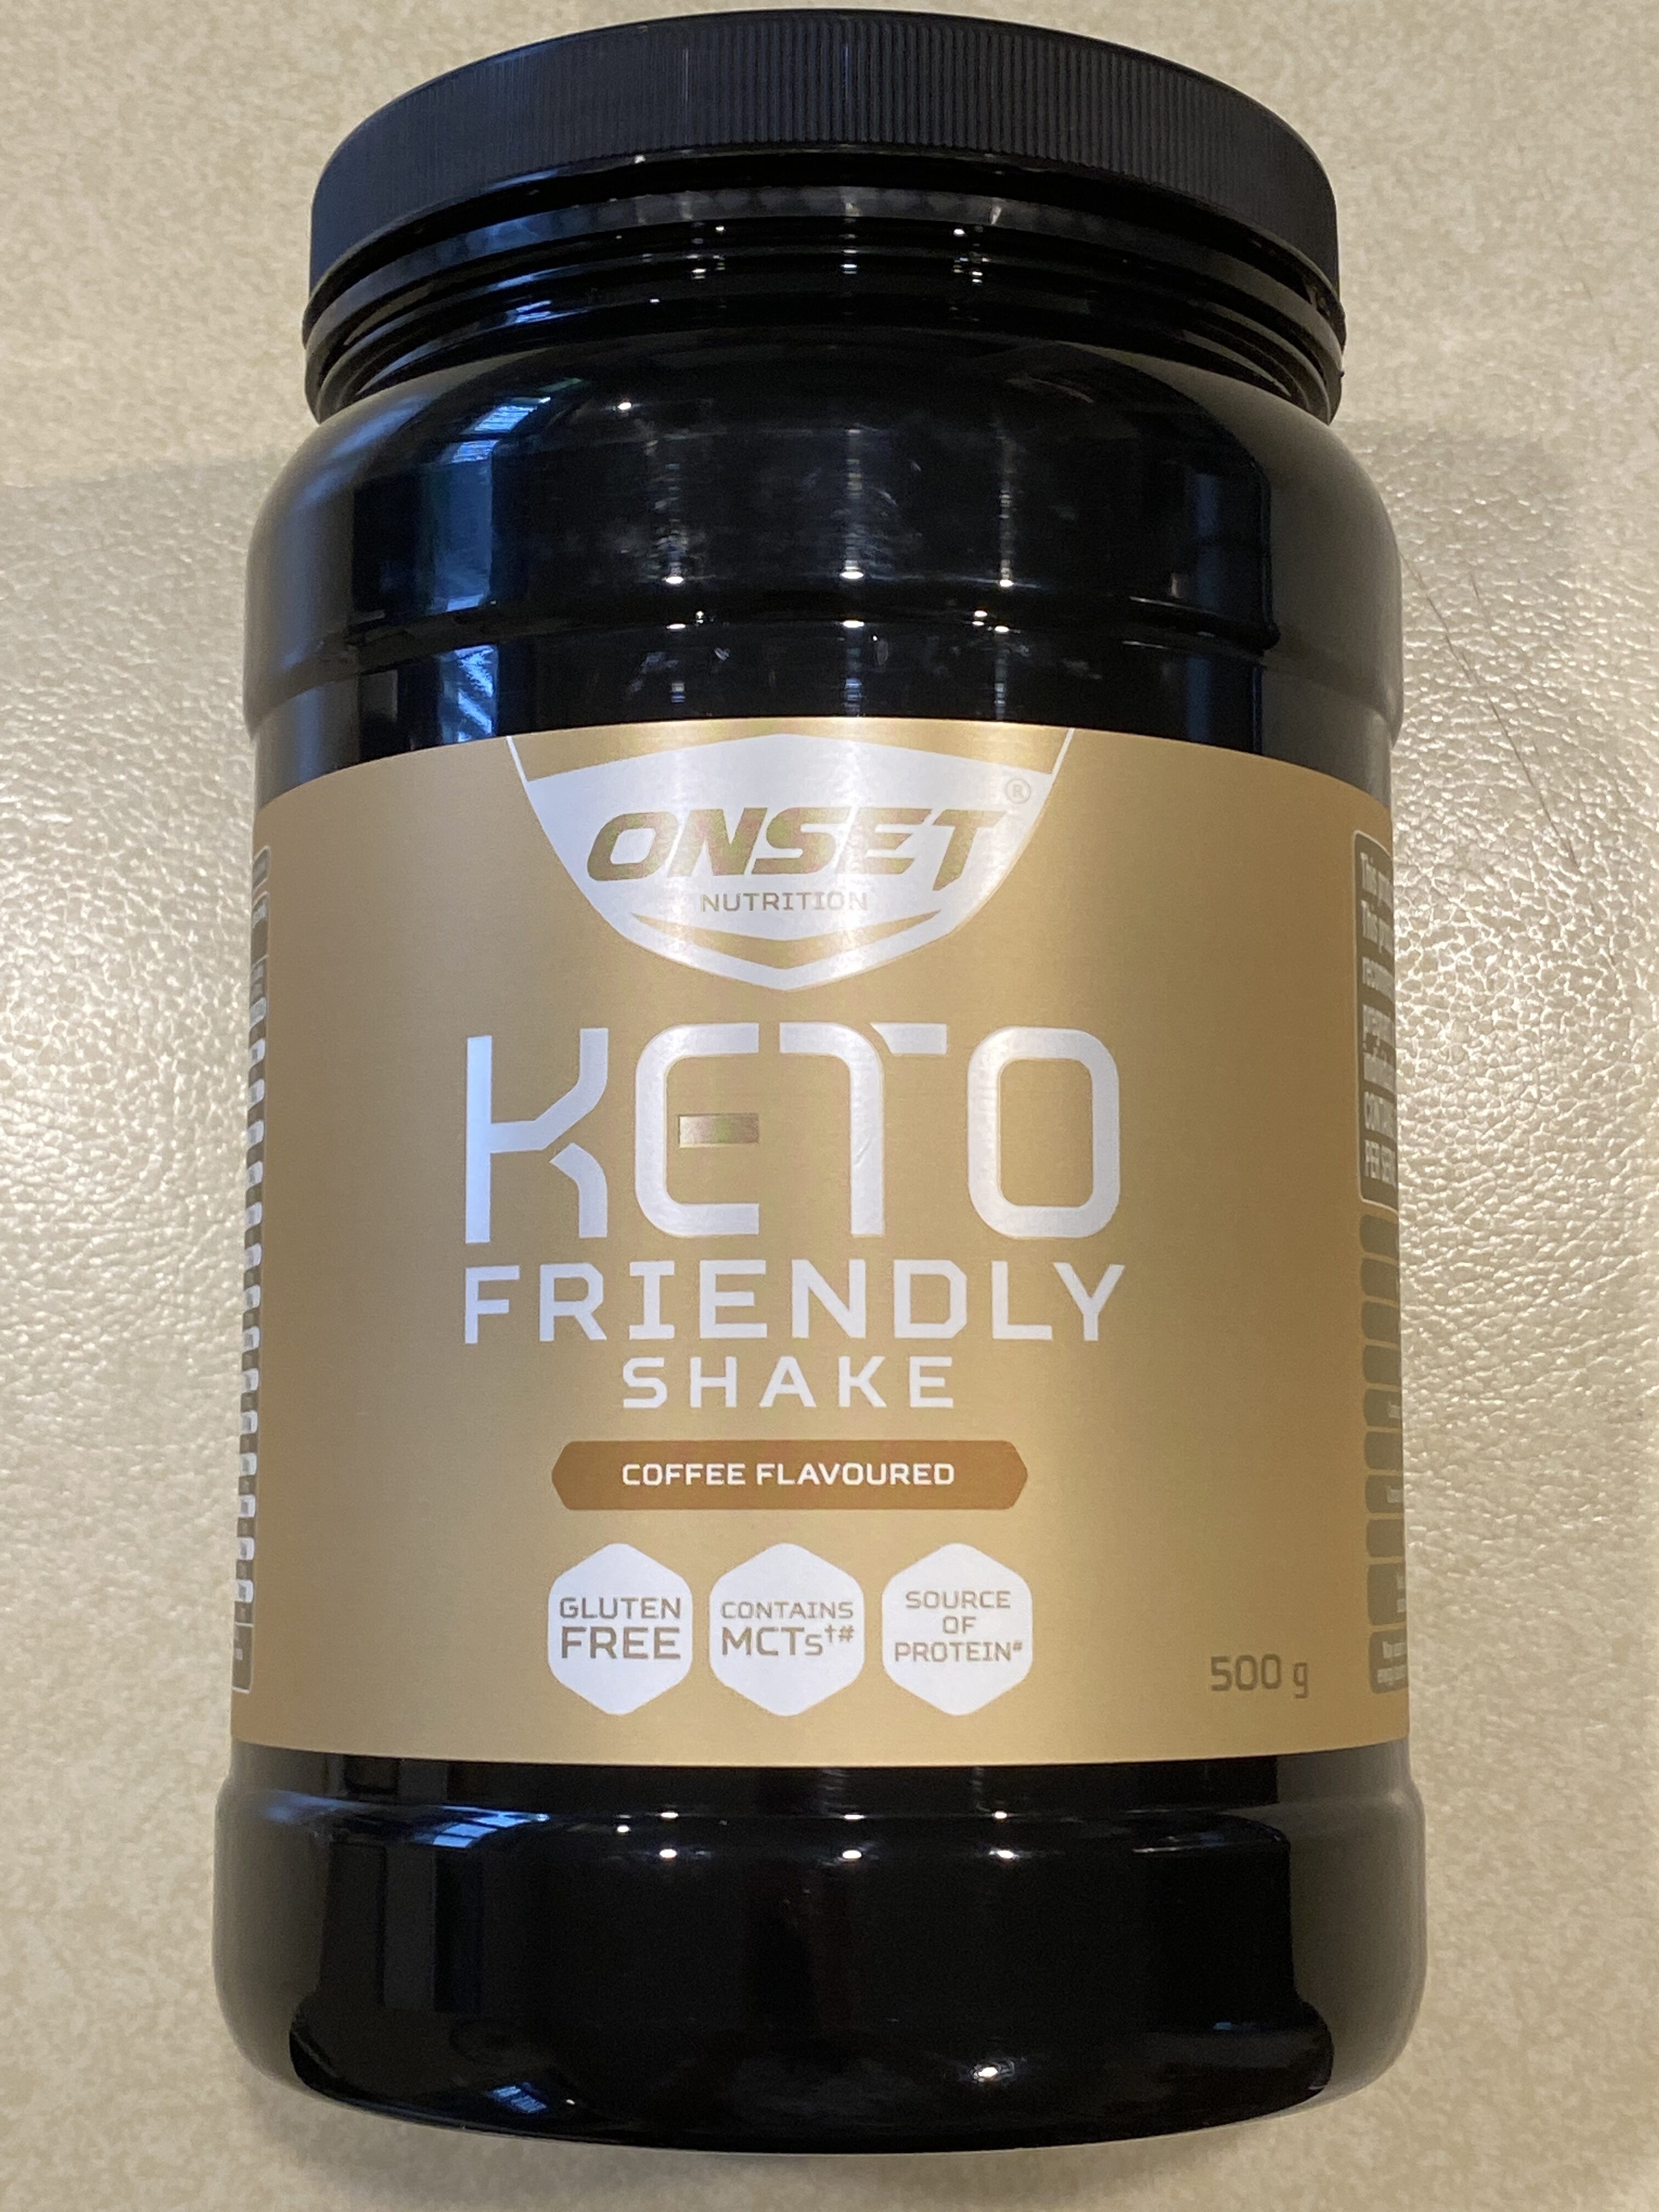 Keto Friendly Shake Coffee Flavoured - Product